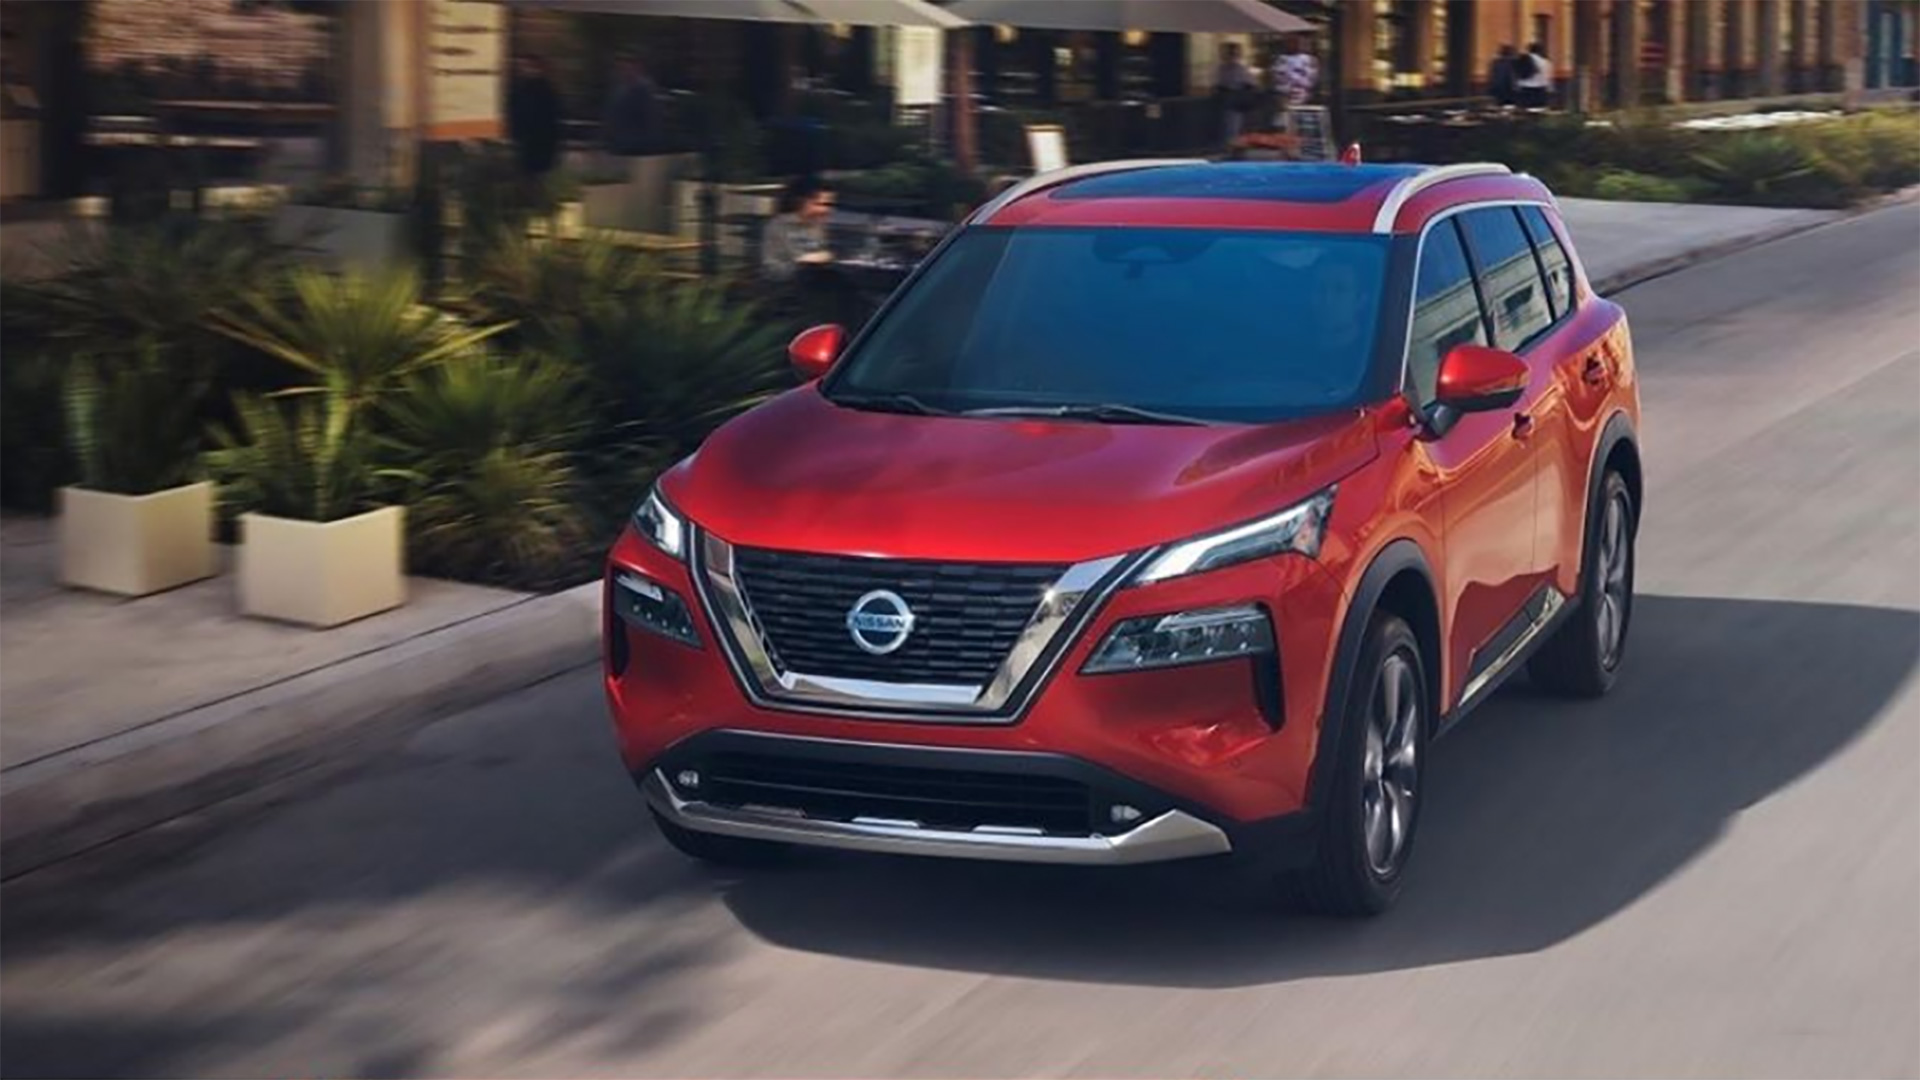 New 2022 Nissan X-Trail revealed in leaked images  Auto 